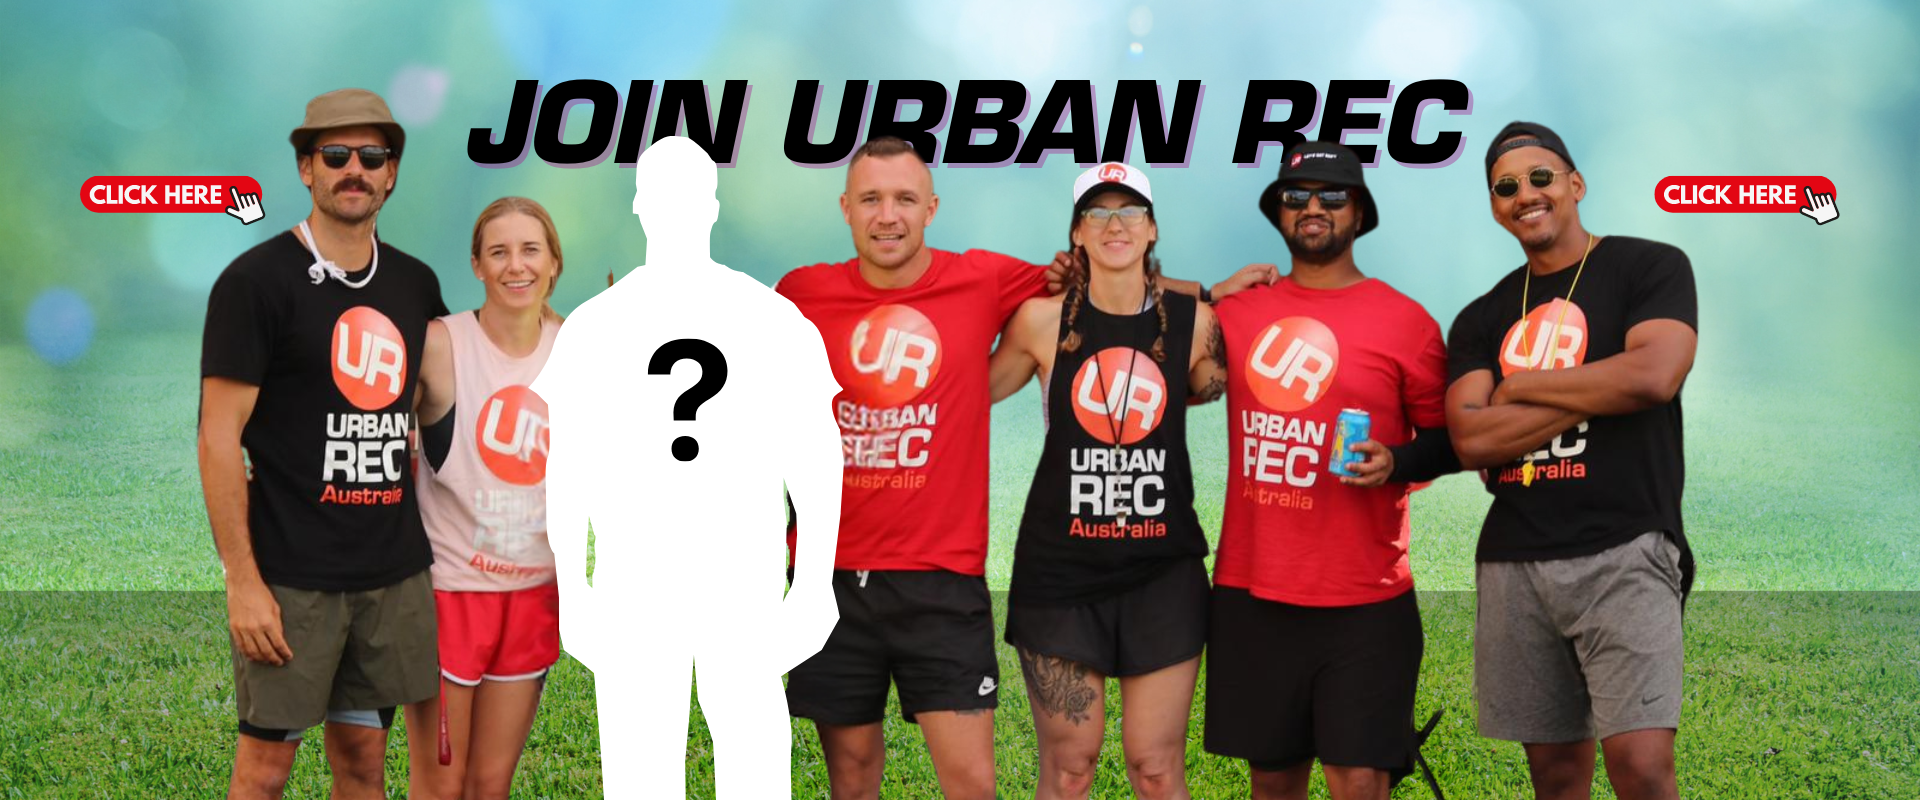 Get into the action with Urban Rec